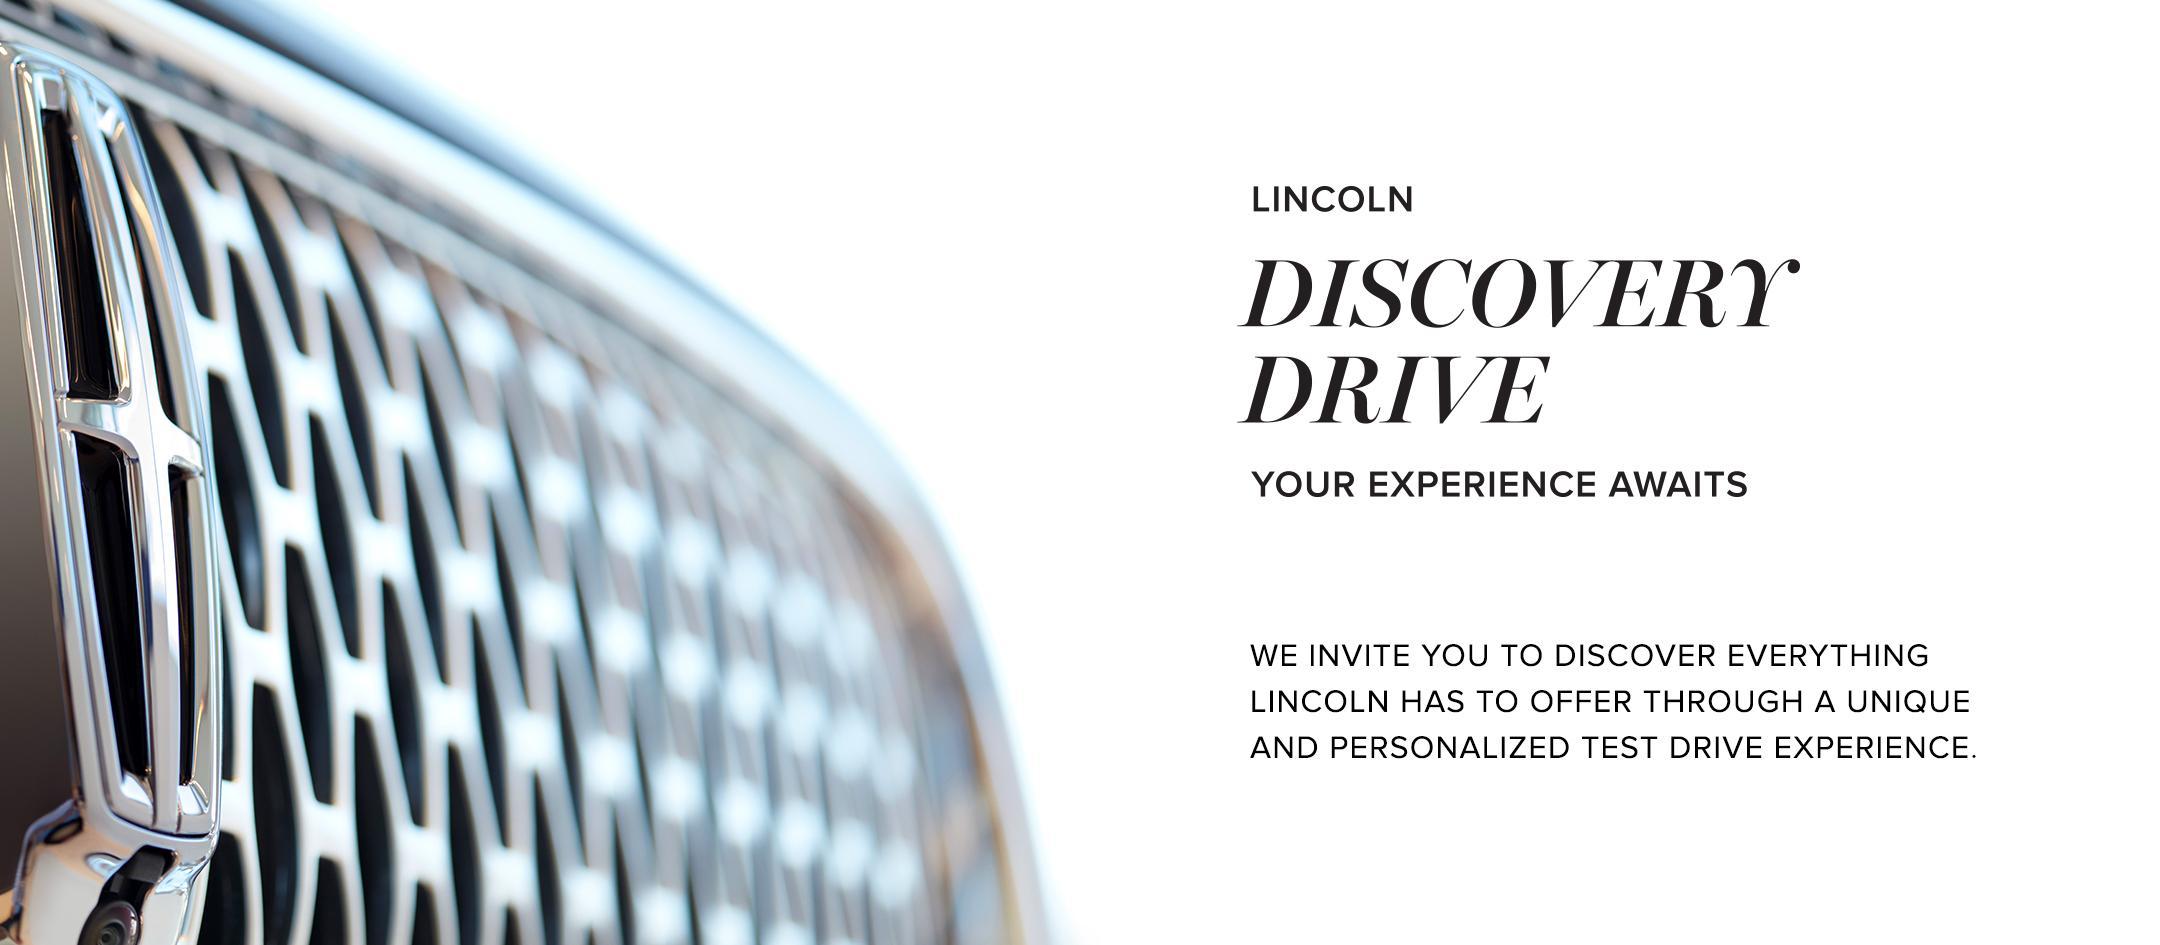 Lincoln Discovery Drive